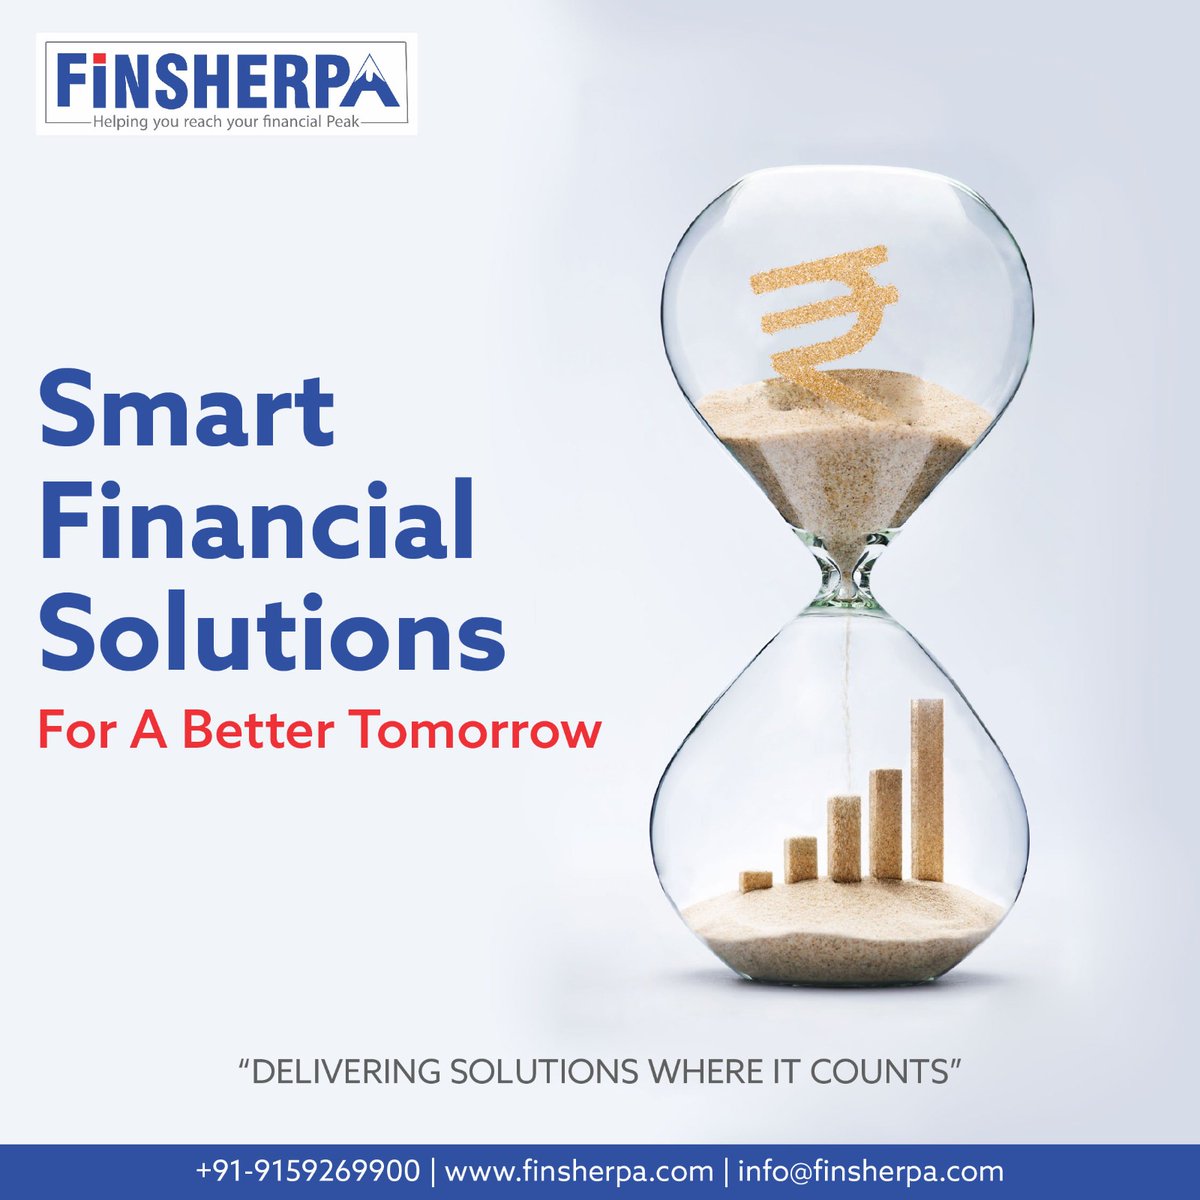 Unlock a brighter financial future with Finsherpa! Discover smart solutions today for a wealthier tomorrow.